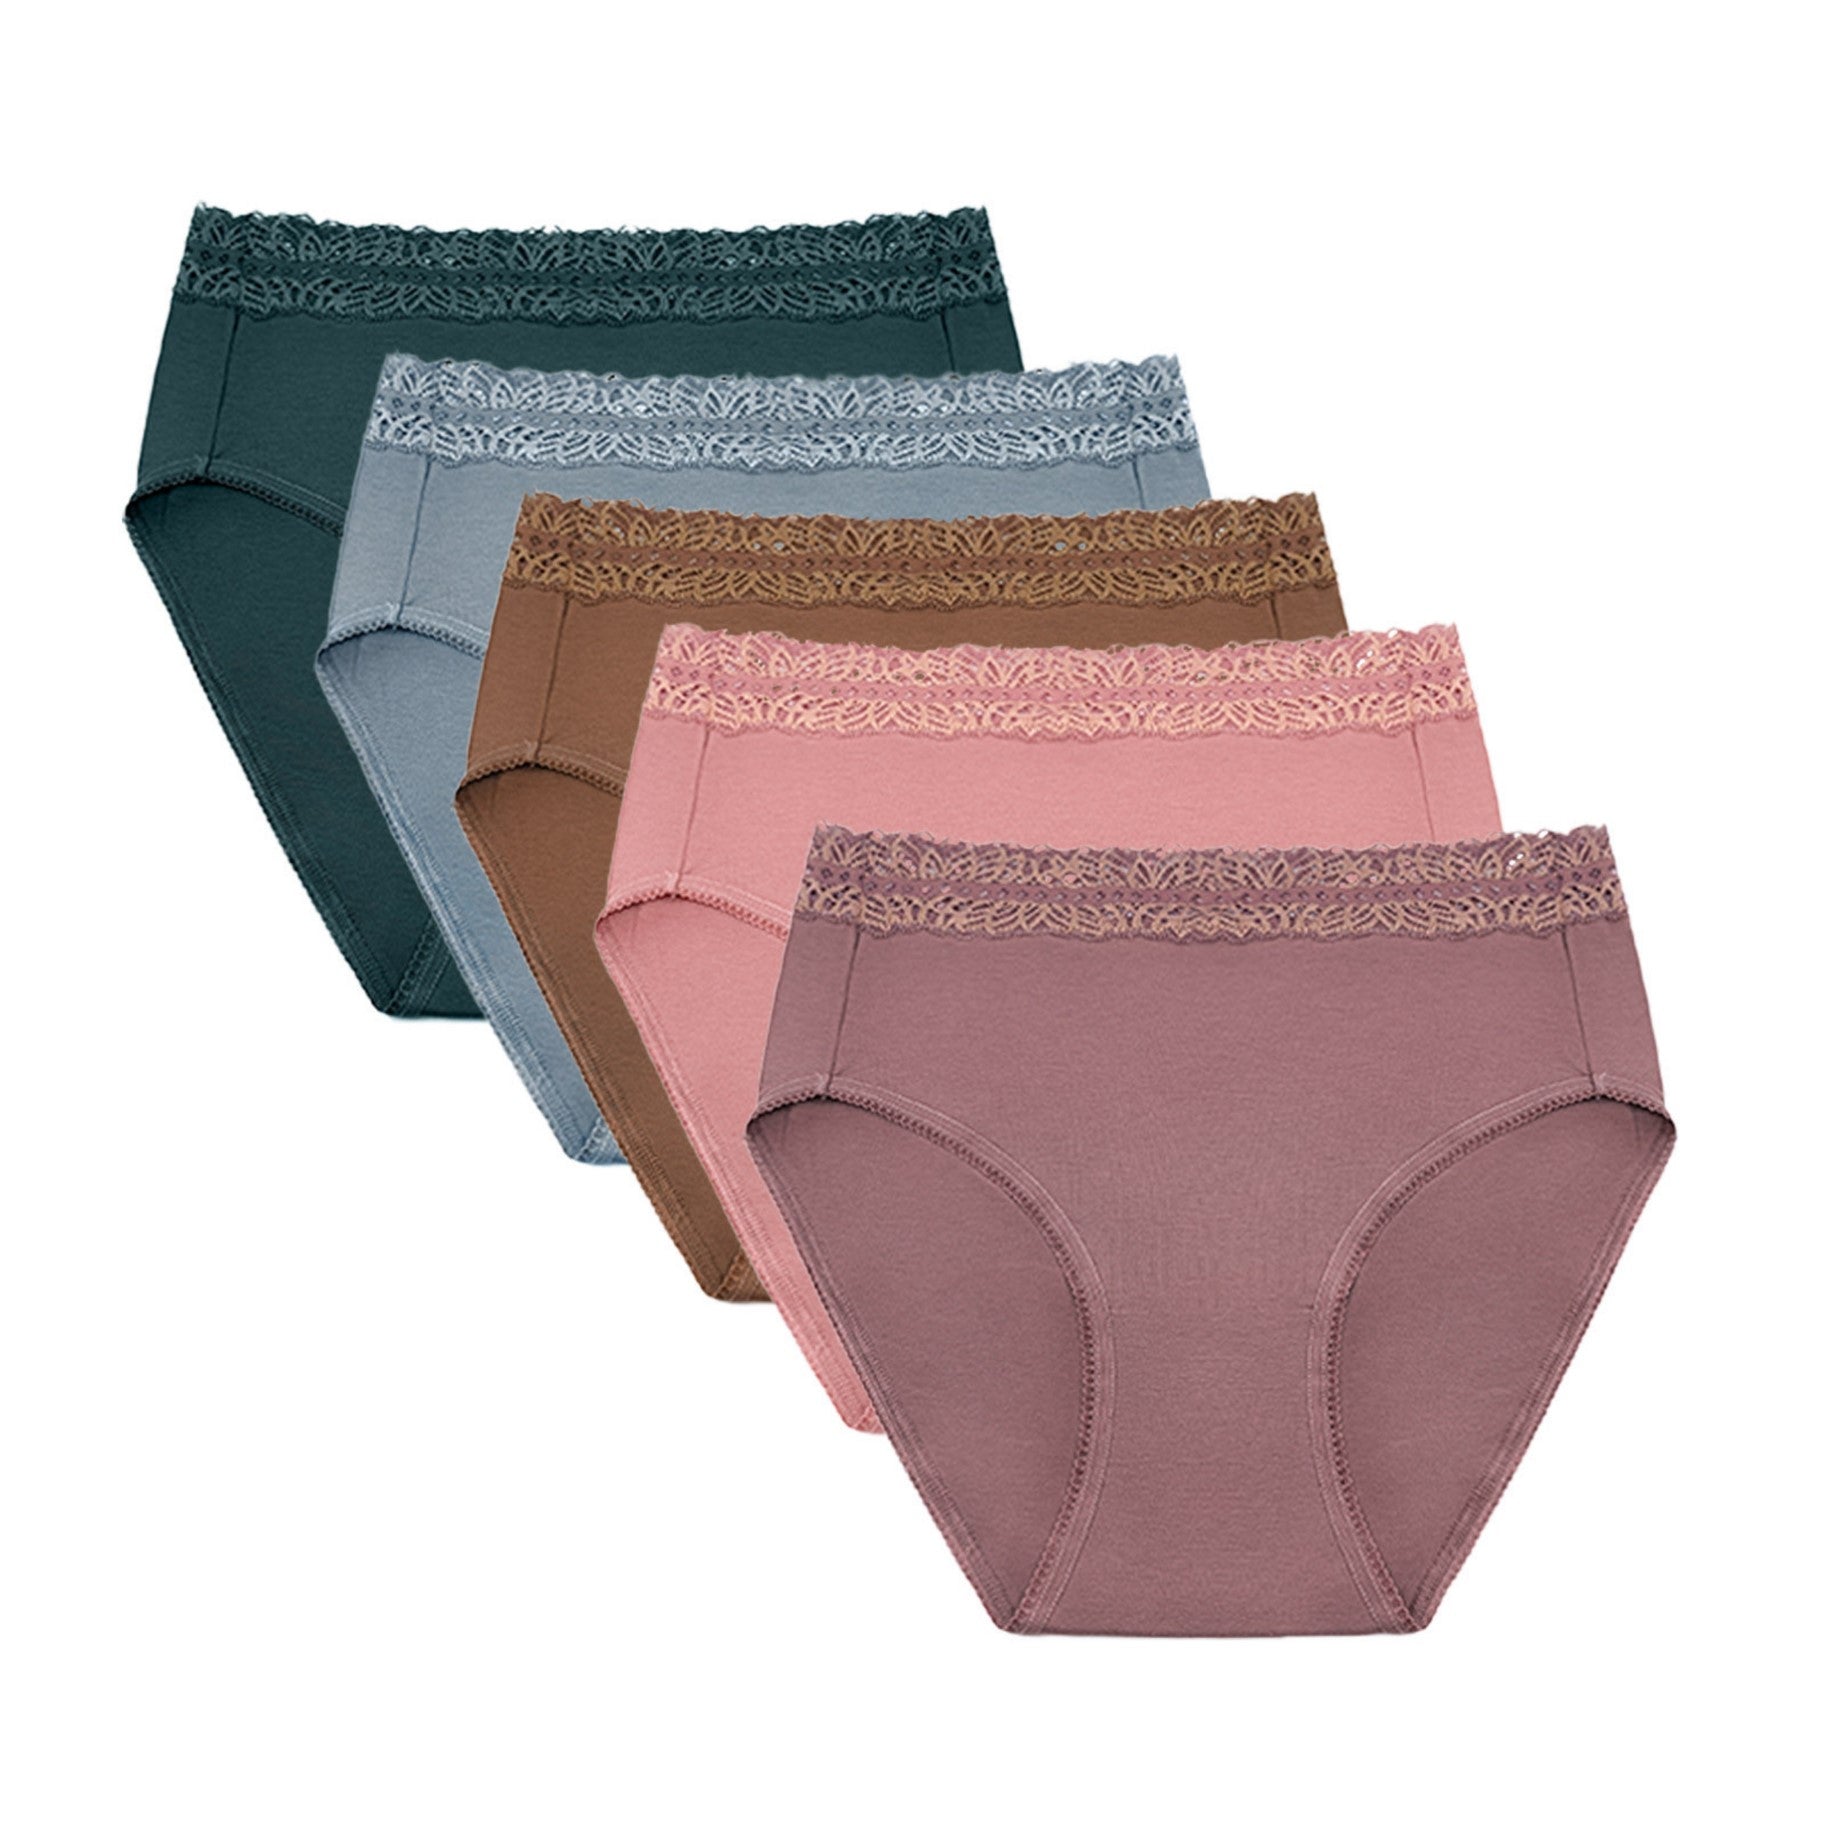 Kindred Bravely High Waisted Postpartum Recovery Panty 5 Pack